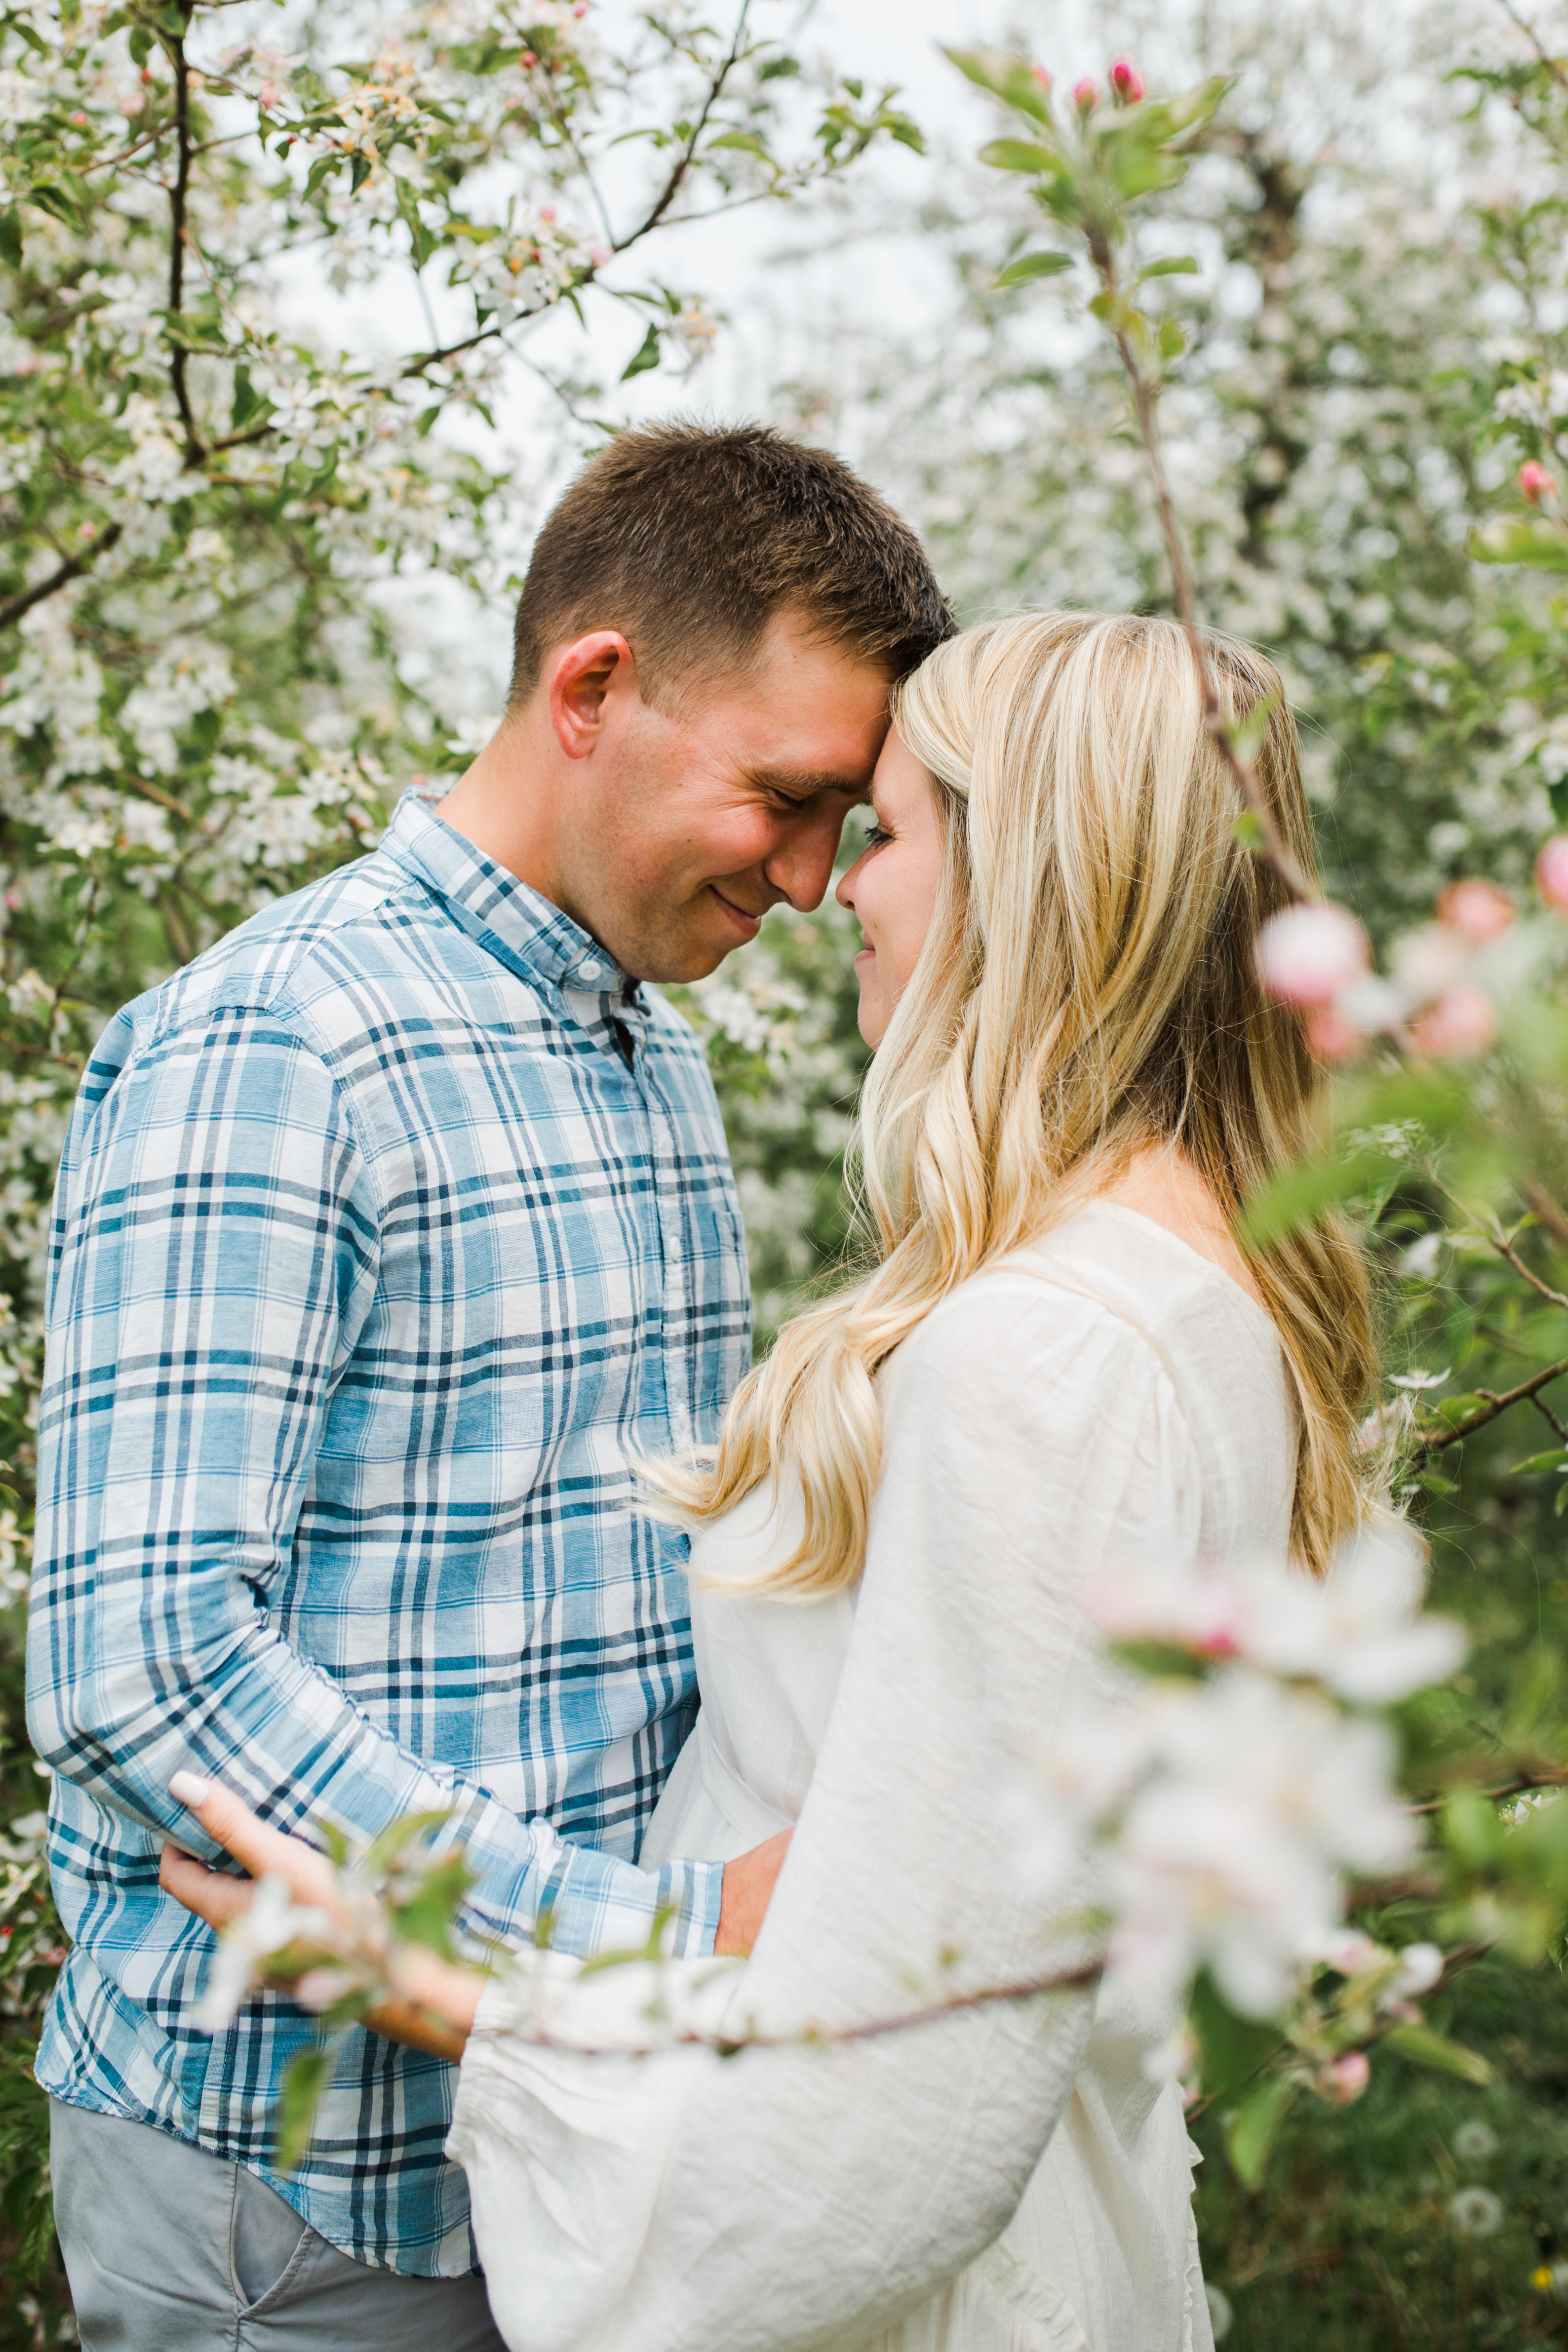 Apple blossoms
engagement session
orchards 